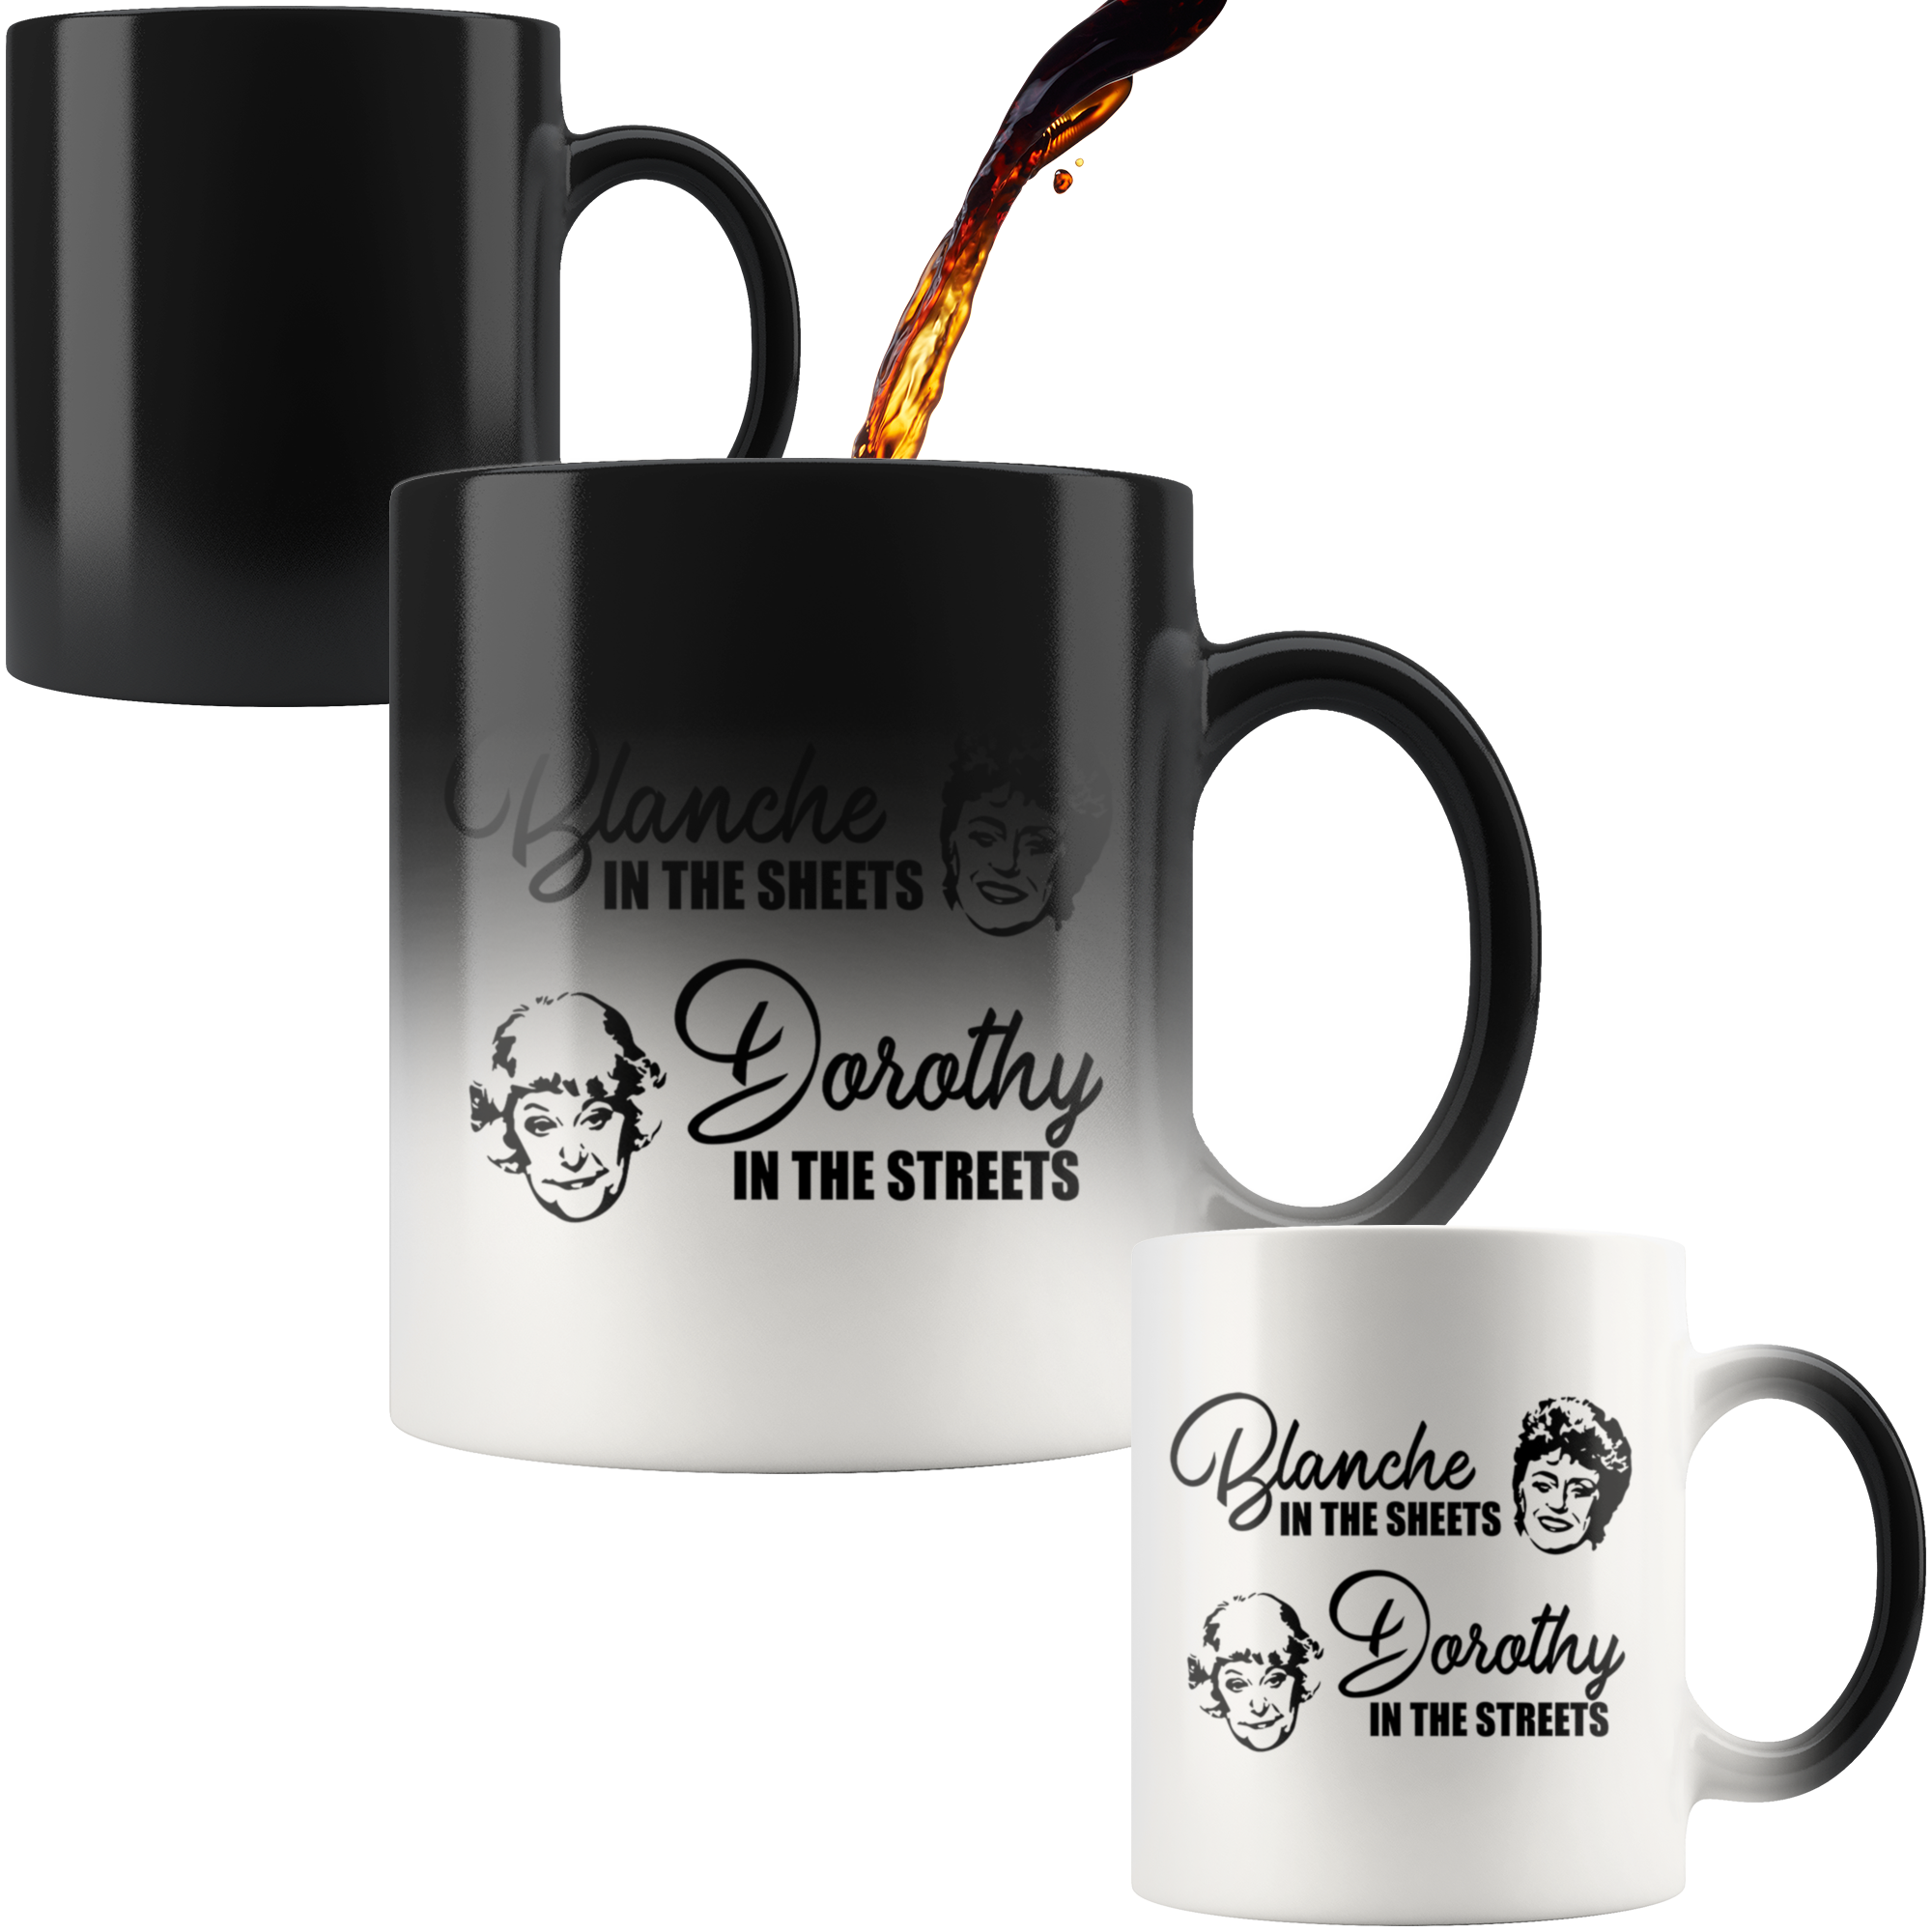 Golden Girls Blanche In The Sheets, Dorothy In The Streets Magic Mug